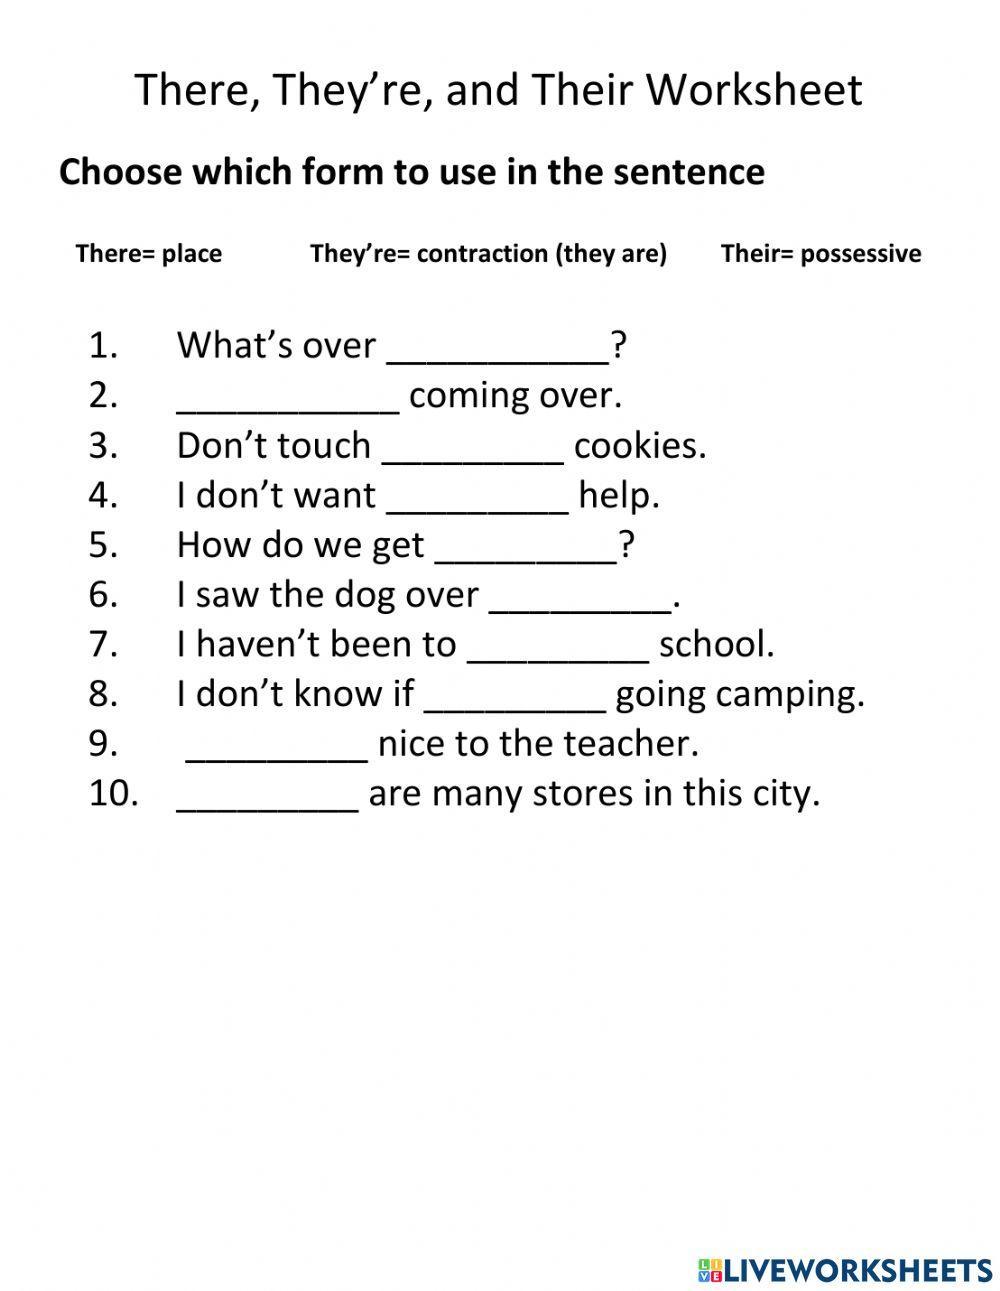 There, They're, Their Worksheet